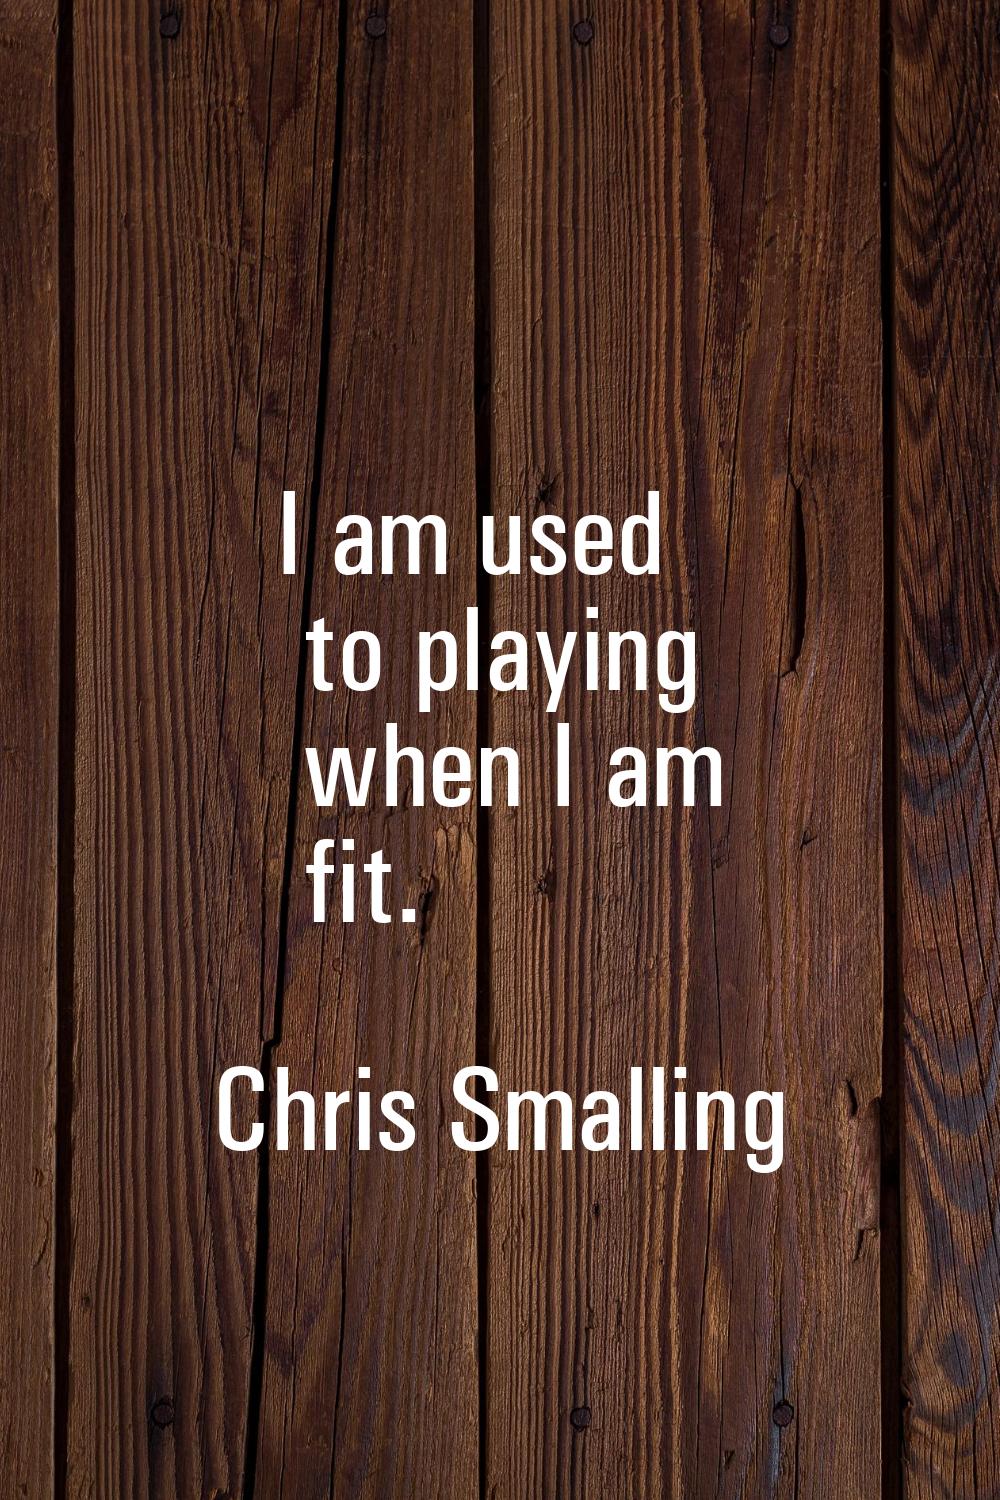 I am used to playing when I am fit.